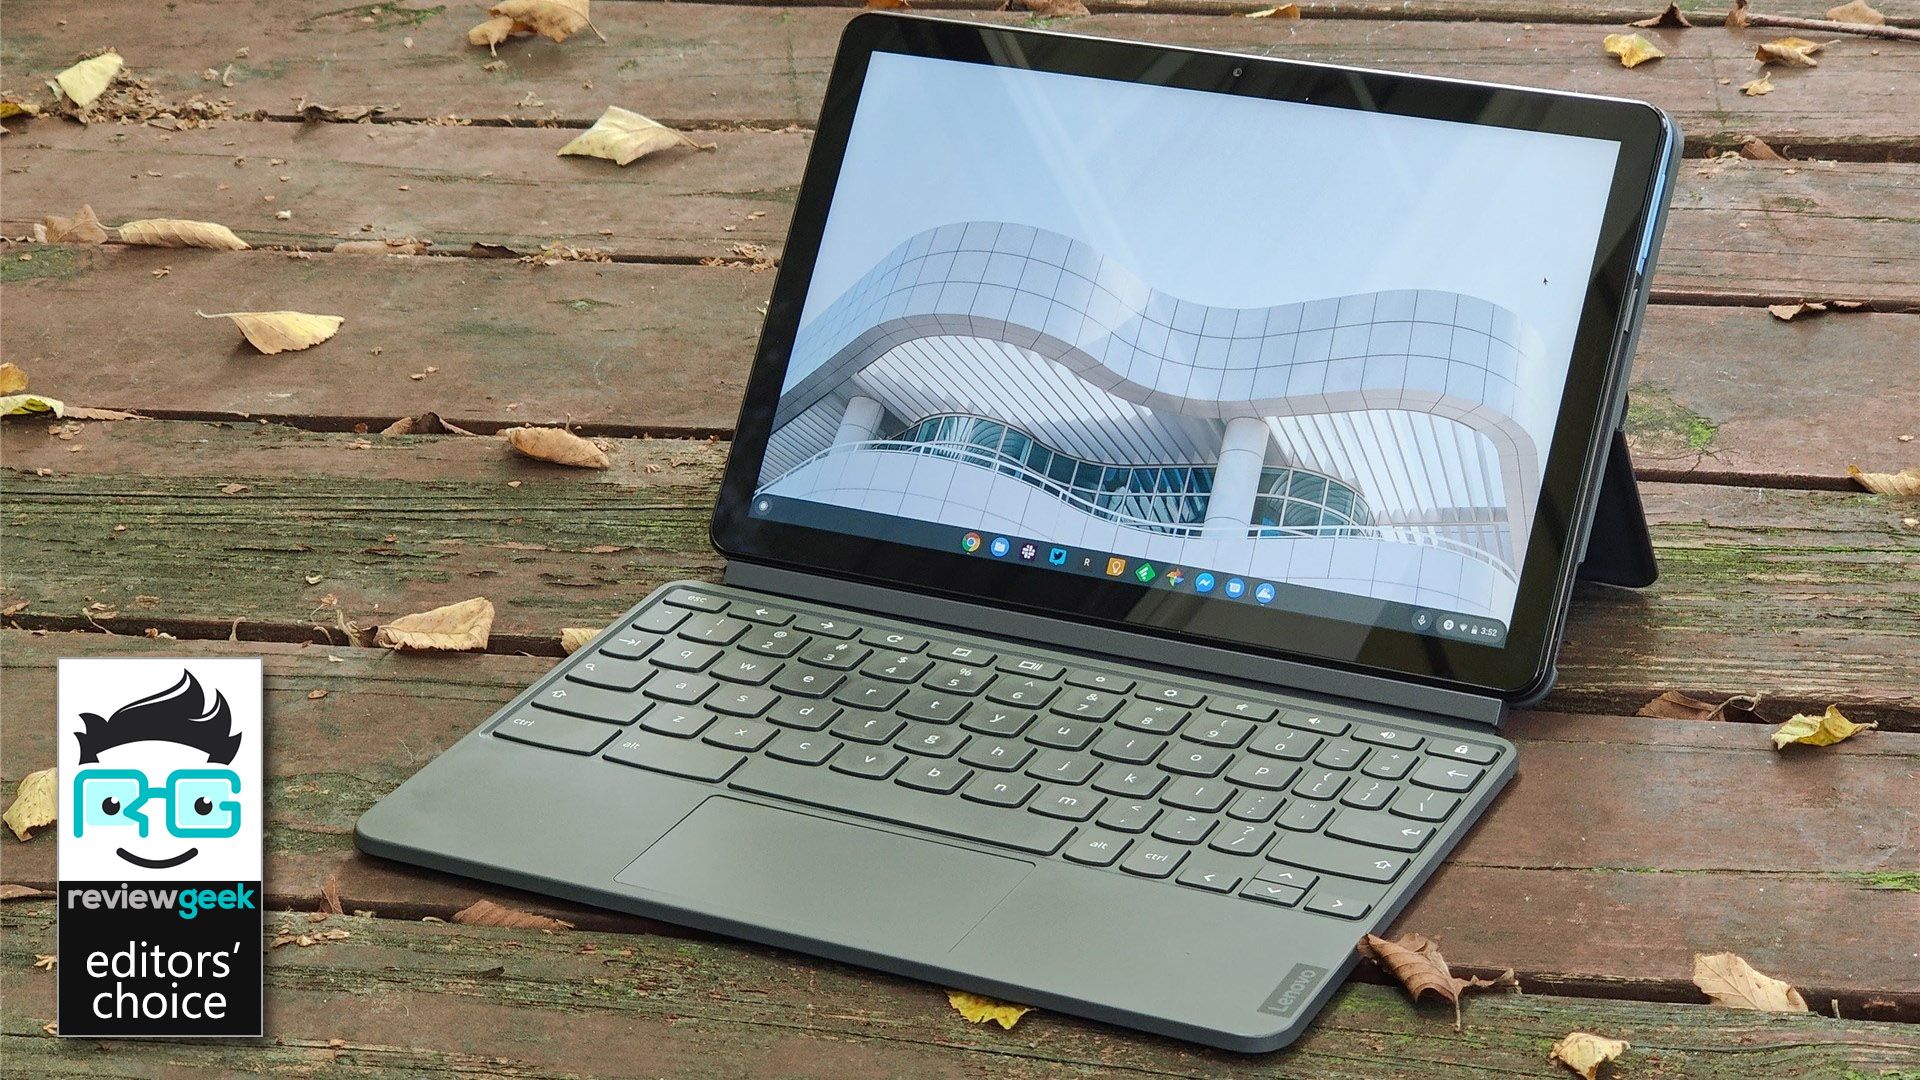 The Lenovo IdeadPad Duet on a wooden deck with leaves all around